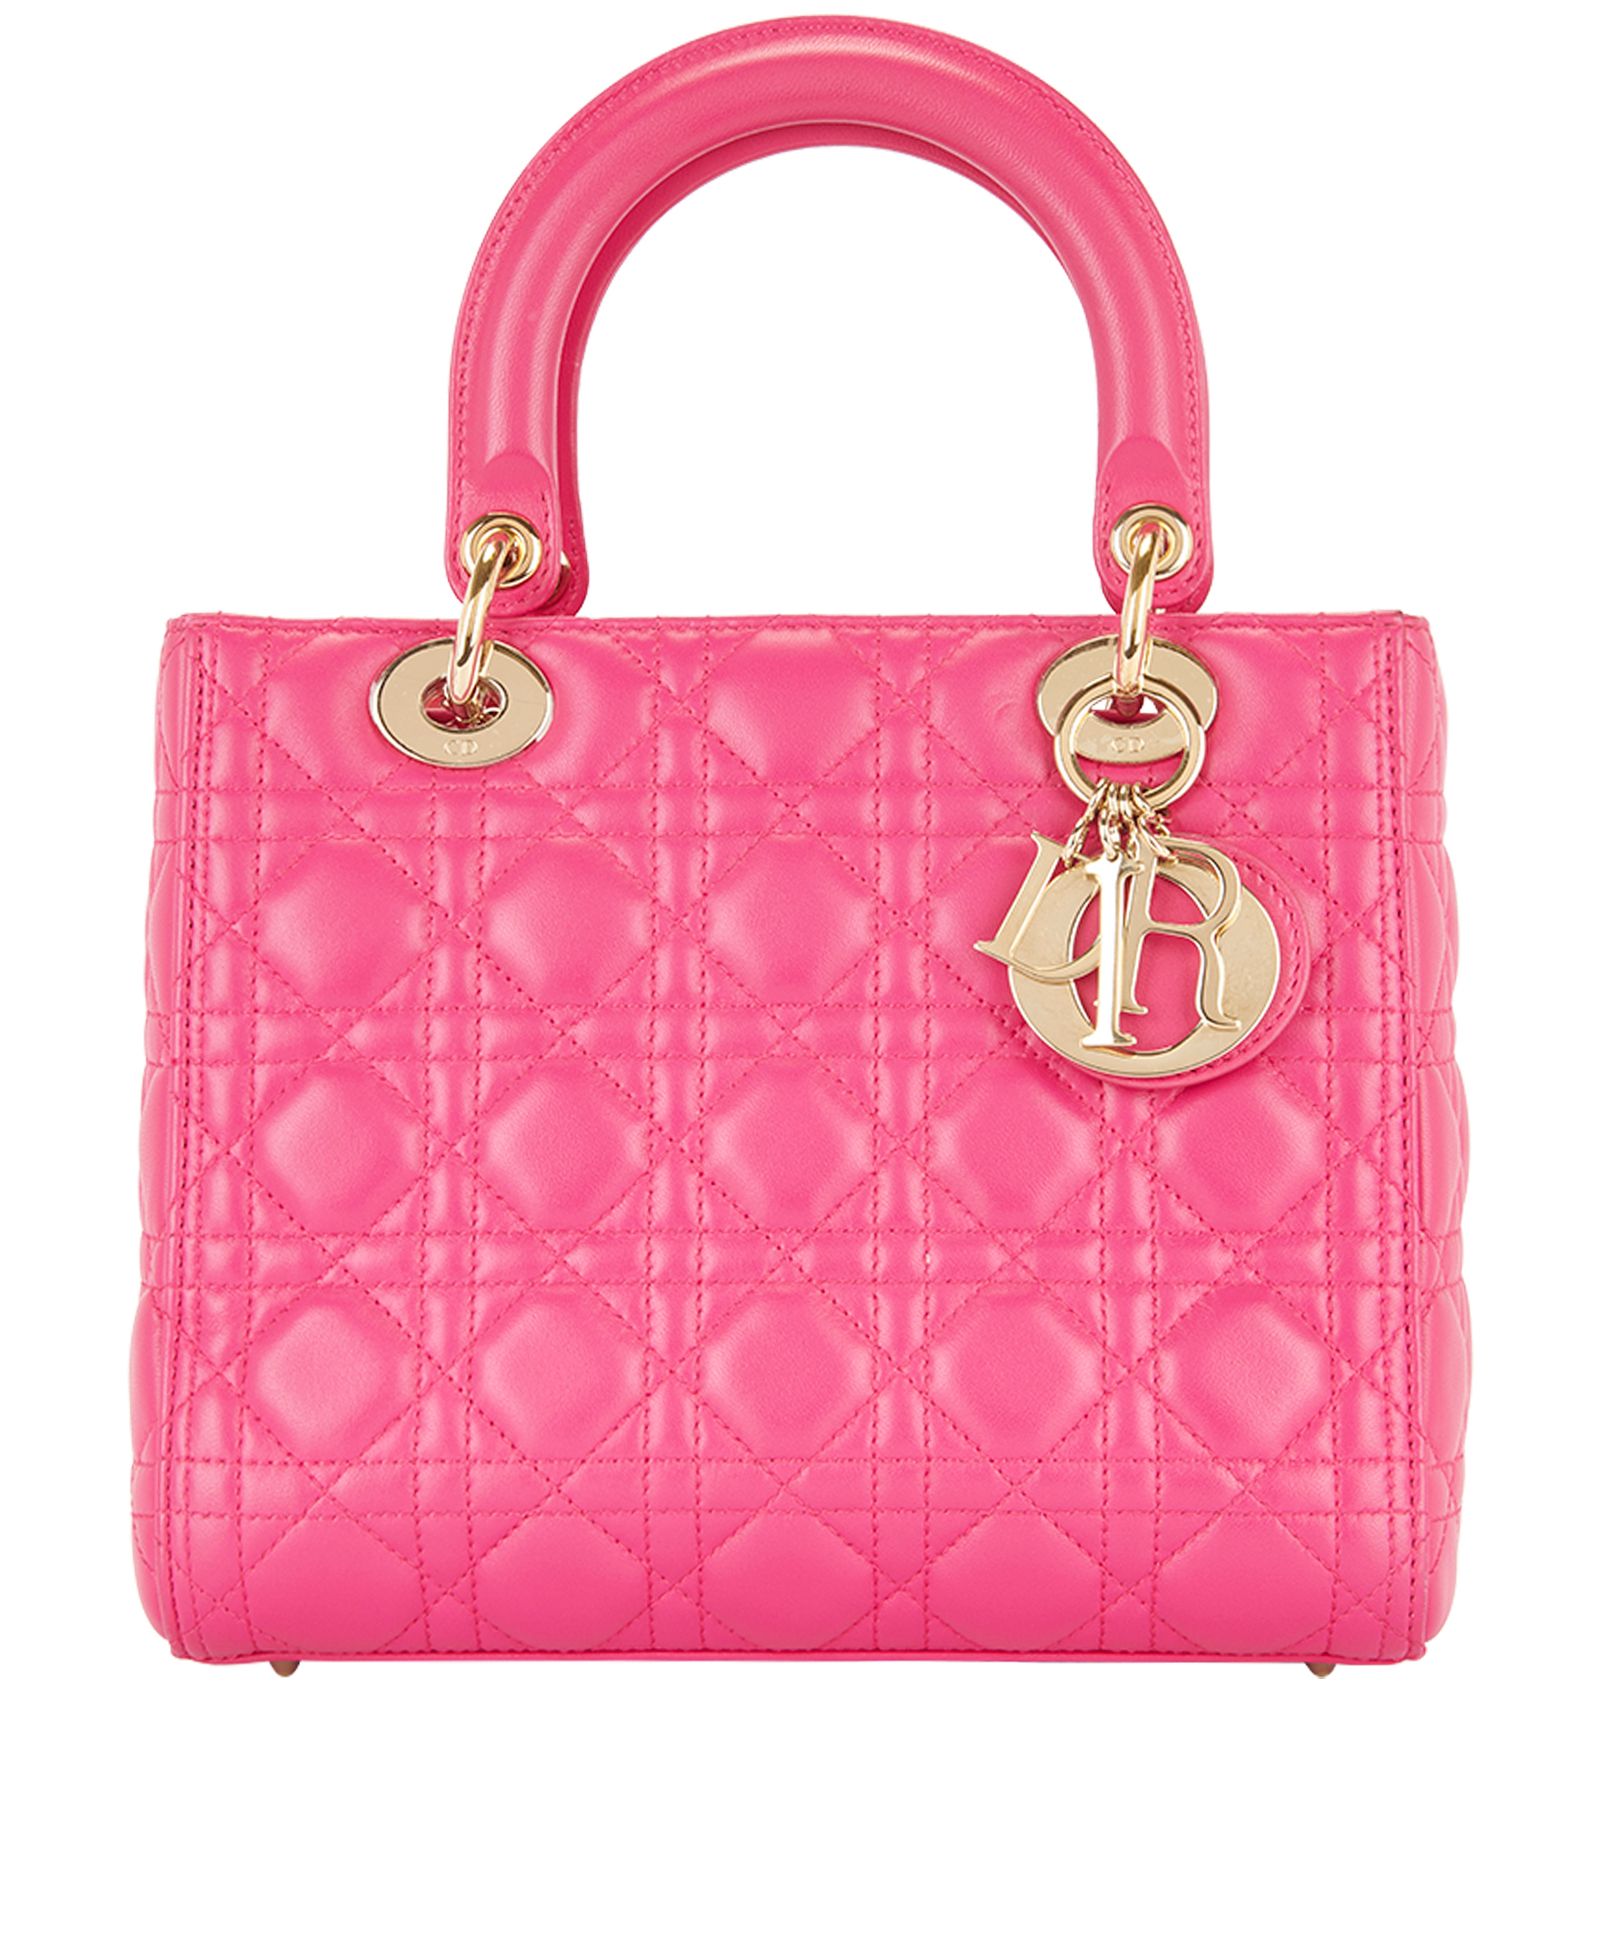 62 Luxury Handbags! My Entire Pink Bag Collection! 